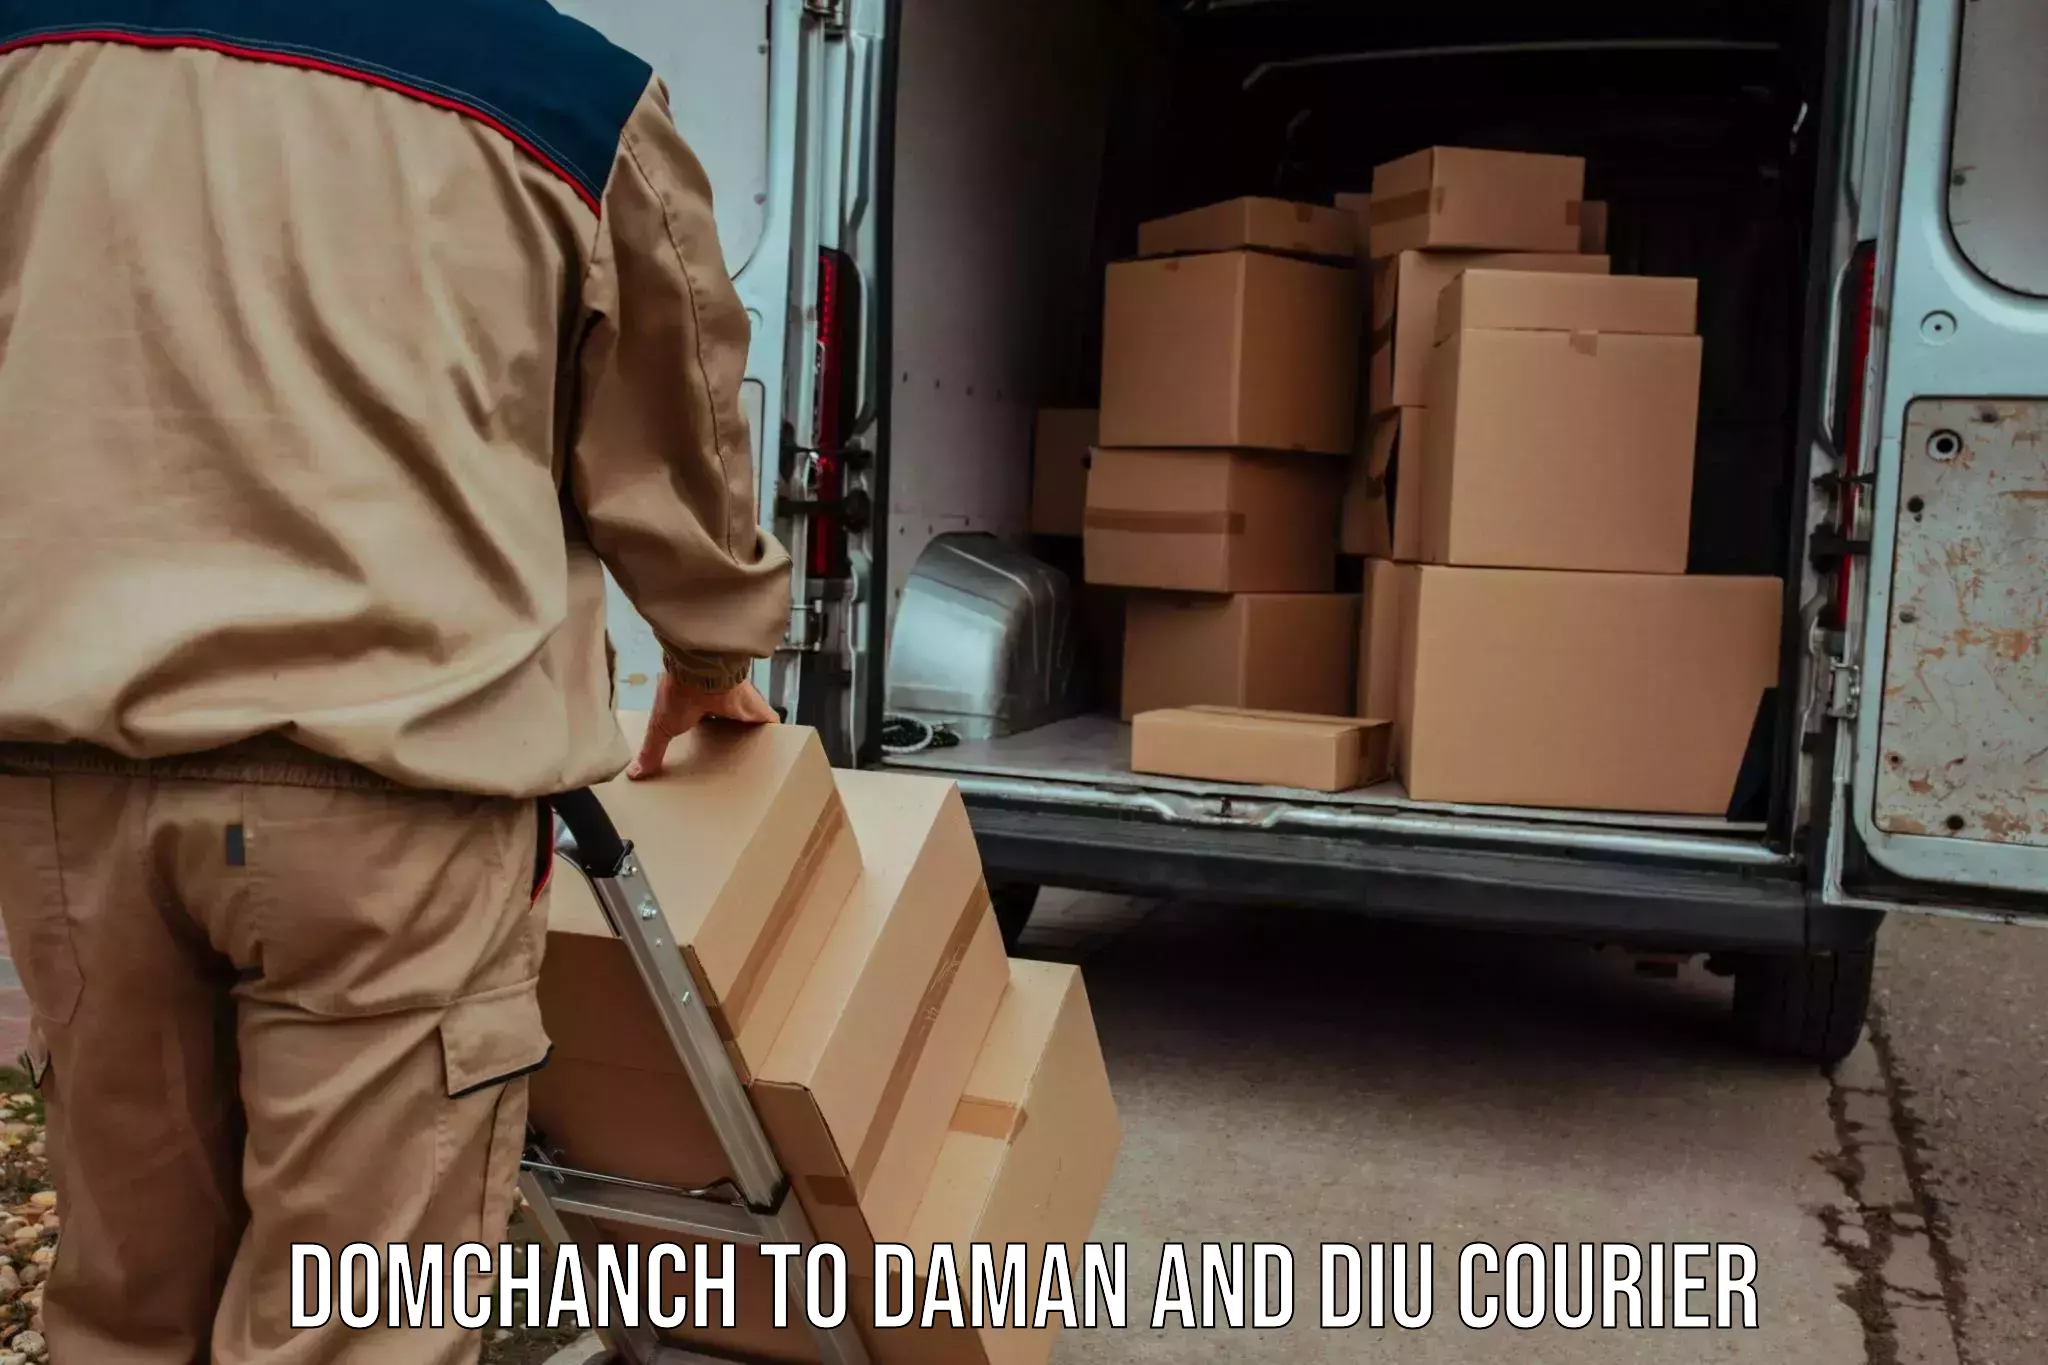 User-friendly courier app Domchanch to Diu